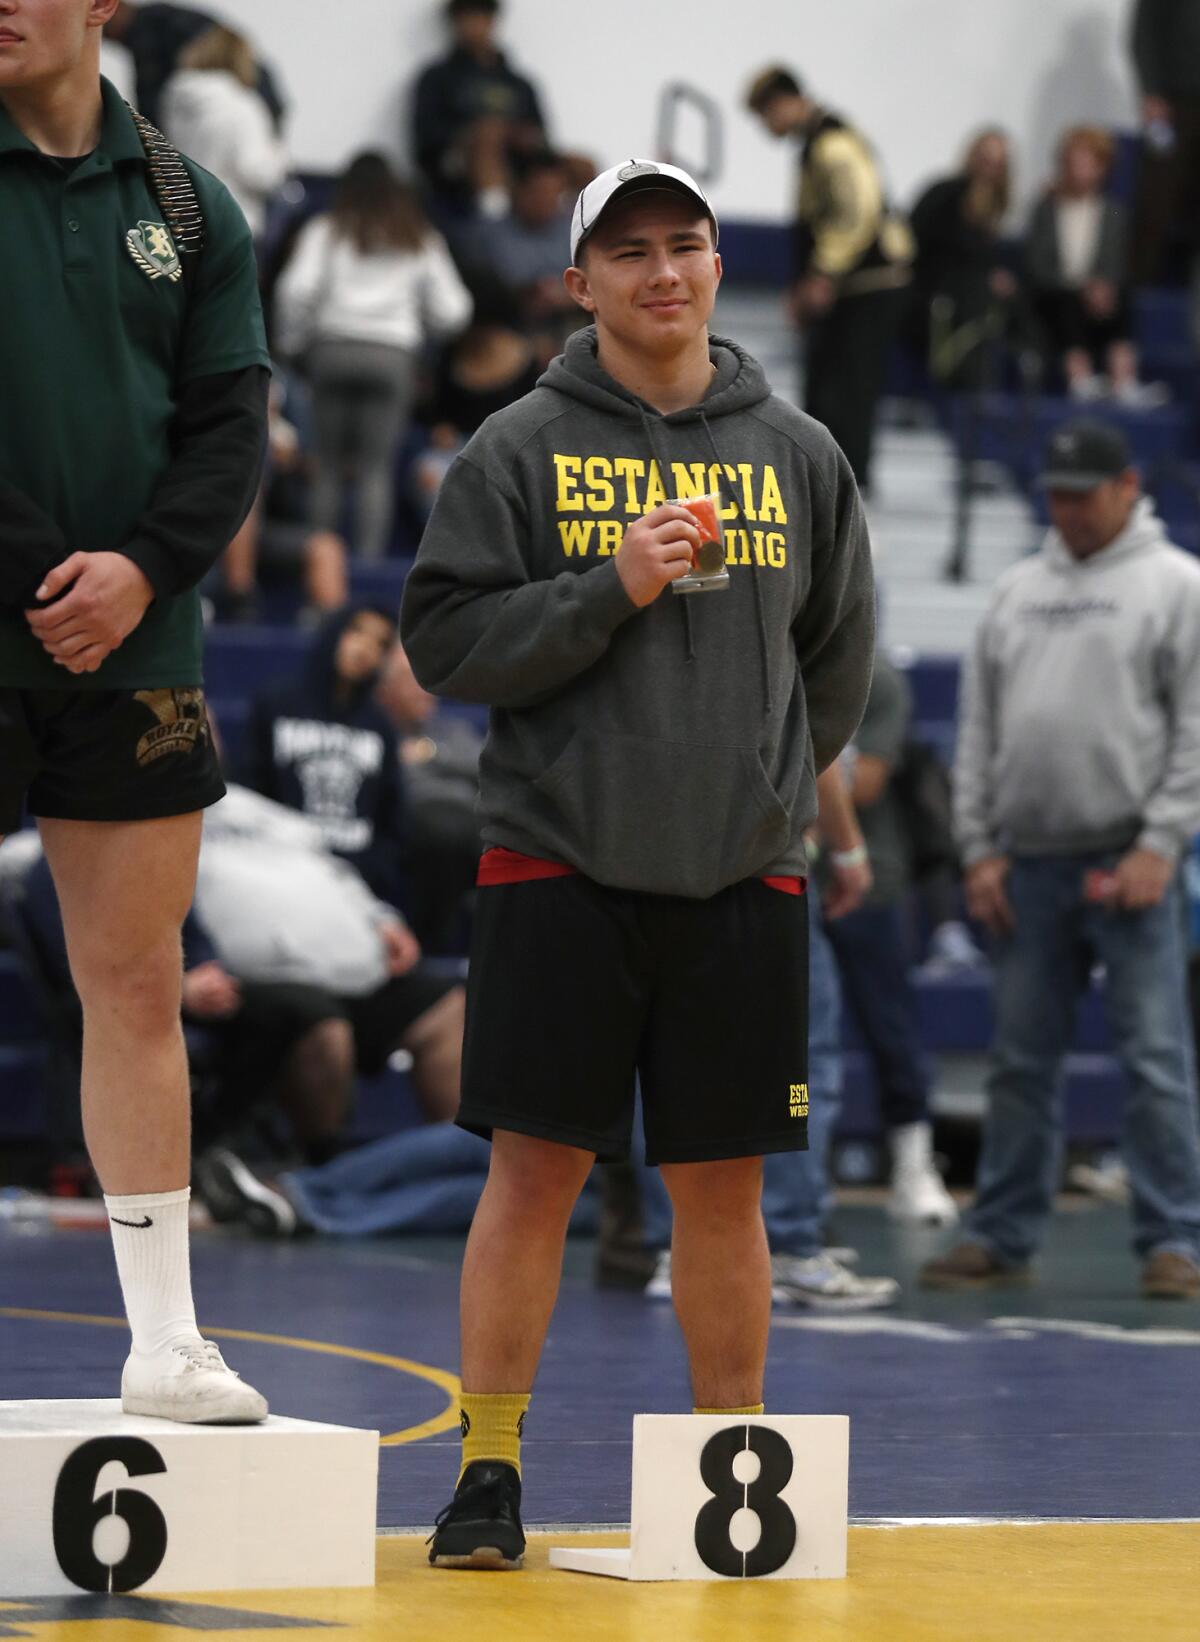 Estancia's Jacob Potts placed eighth in the 195-pound weight class during the CIF Southern Section Masters wrestling meet at Sonora High in La Habra on Saturday.